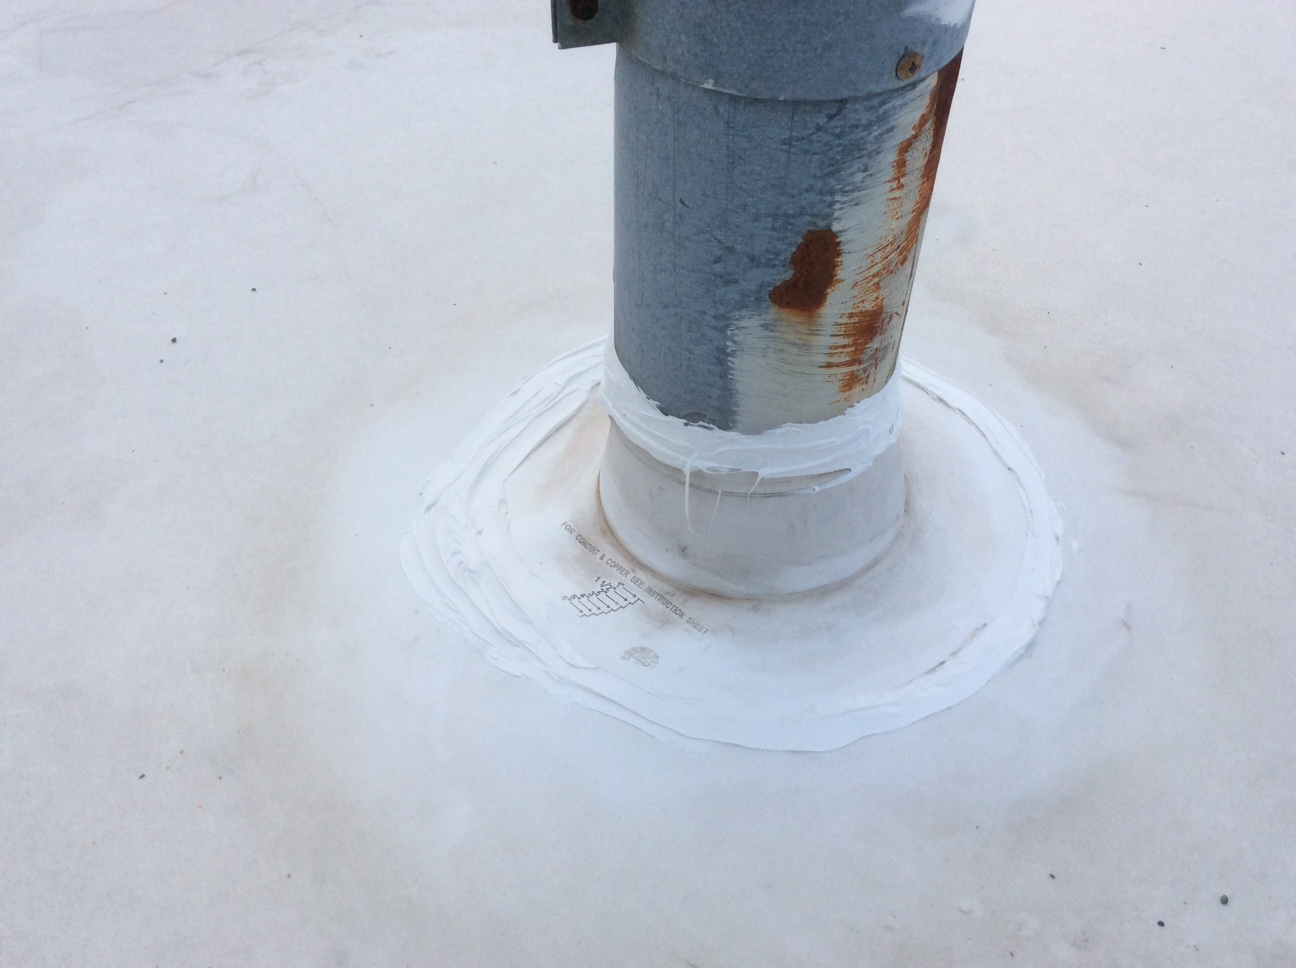 This is a view of a vent pipe on a flat roof.